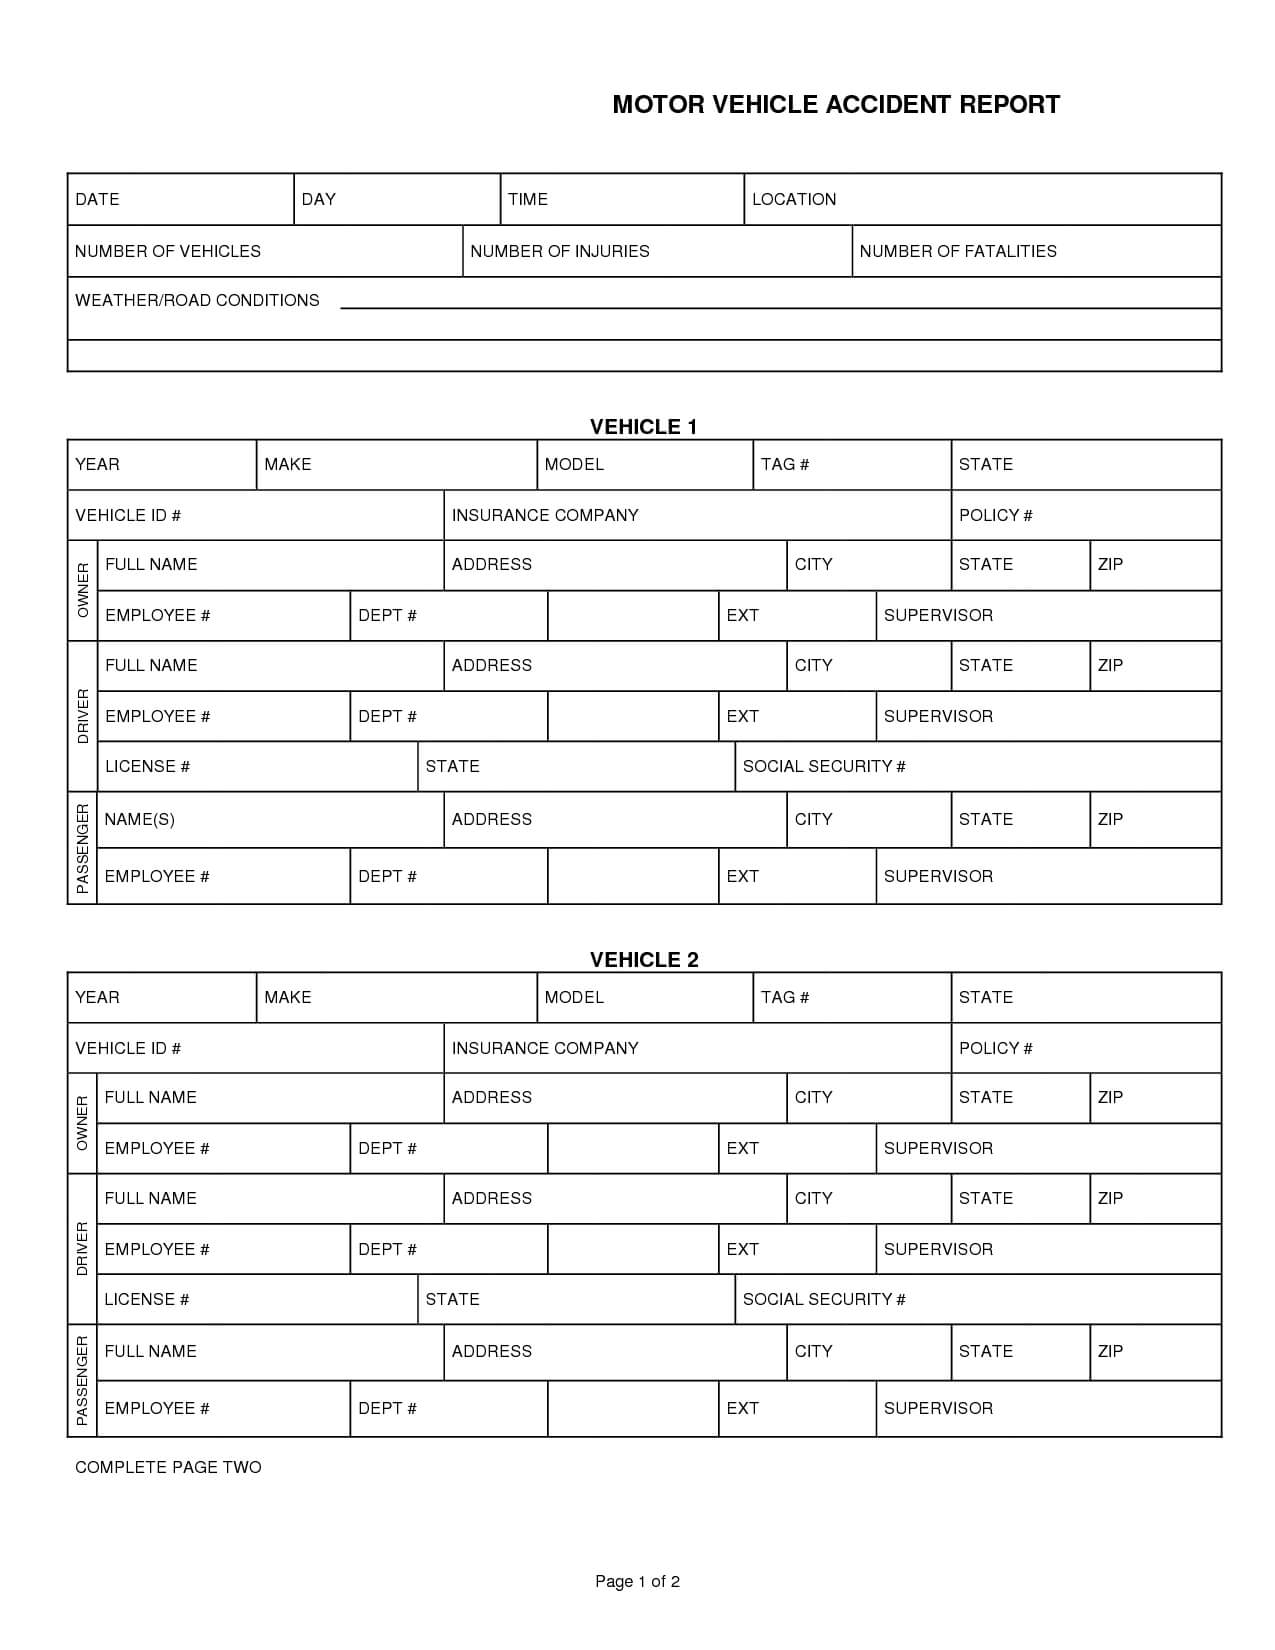 010 Template Ideas Car Accident Report Form 290132 Within Motor Vehicle Accident Report Form Template